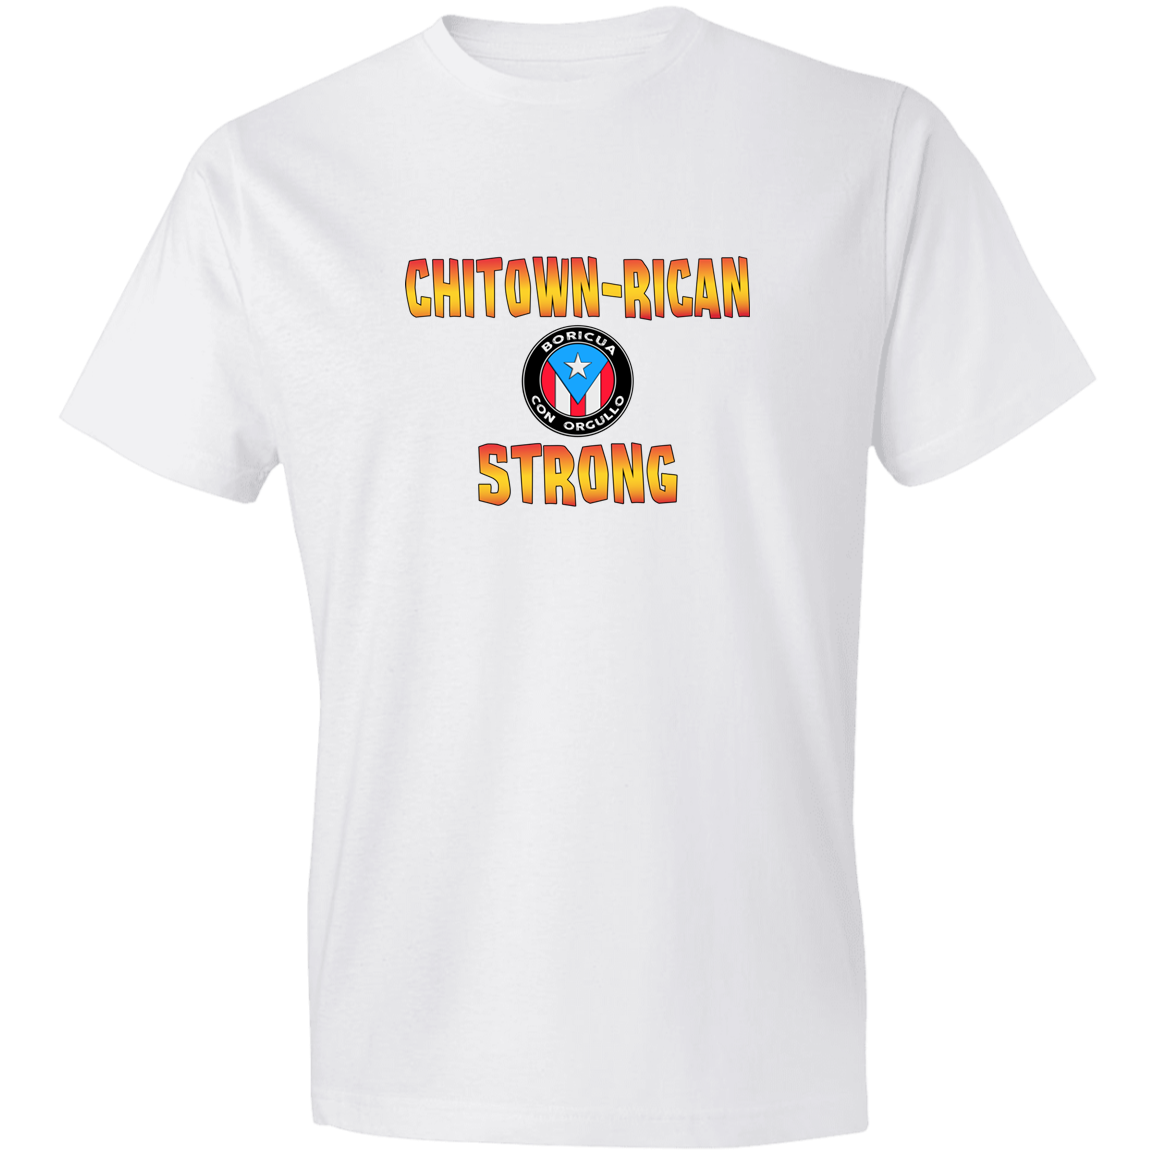 Chitown Rican Strong Lightweight T-Shirt 4.5 oz - Puerto Rican Pride